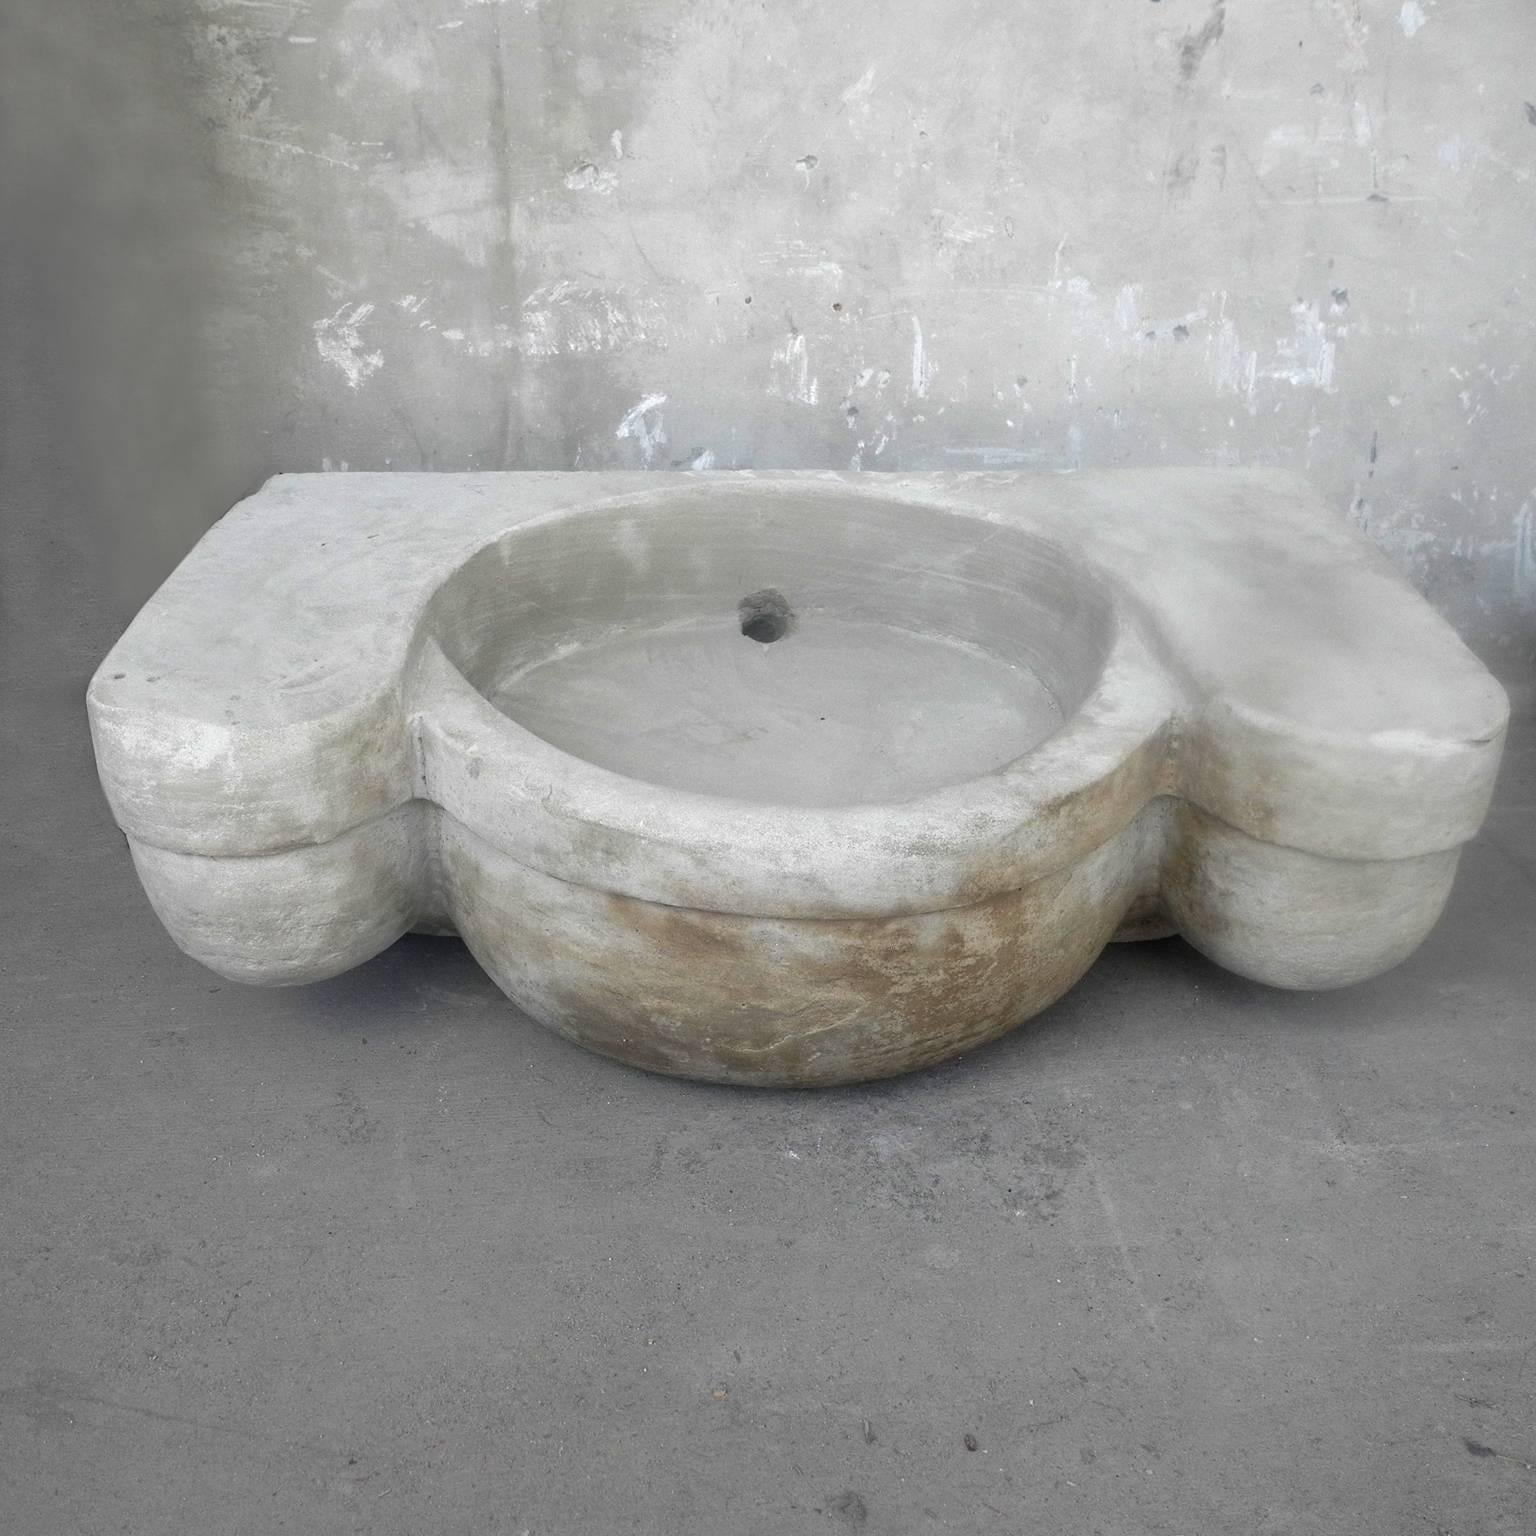 This is a fabulously large 17th century stone sink or evier from the Chateau de Saint Christol in the French Languedoc Village of Mas Christol. This antique sink is wonderful as the centerpiece to any bathroom. With its deep basin and large side